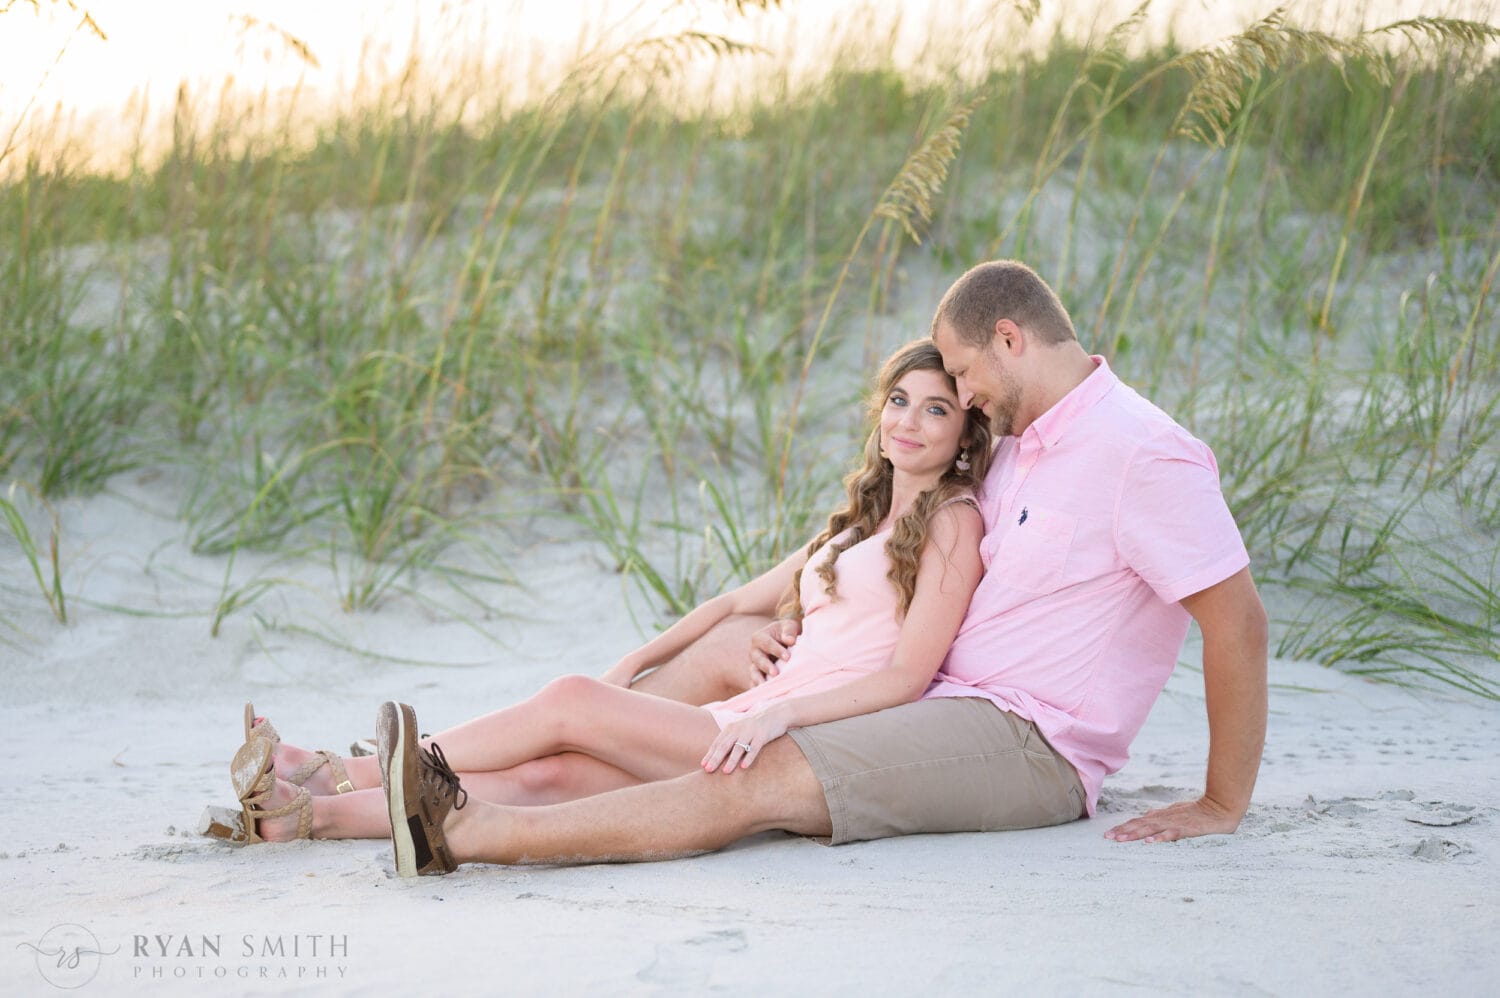 Laying together by the summer dunes - Huntington Beach State Park - Myrtle Beach